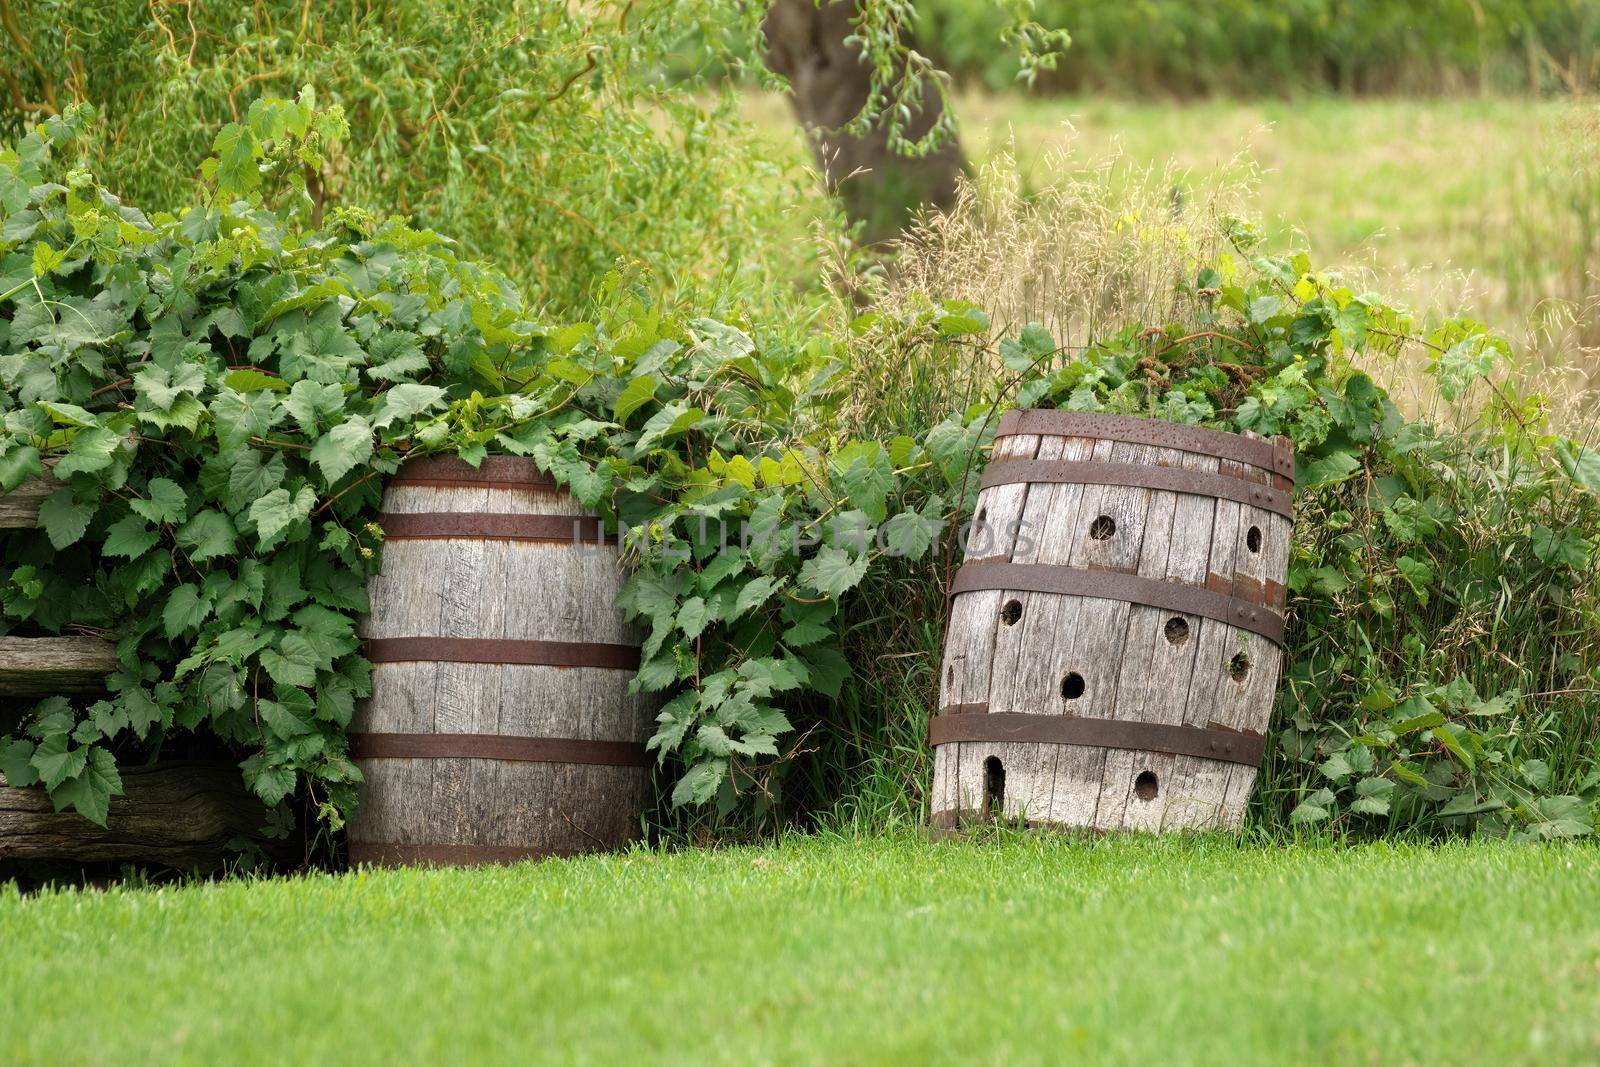 Wooden Barrels in a Garden have Many Uses including Storing Rain Water or as Planters or Decoration by markvandam